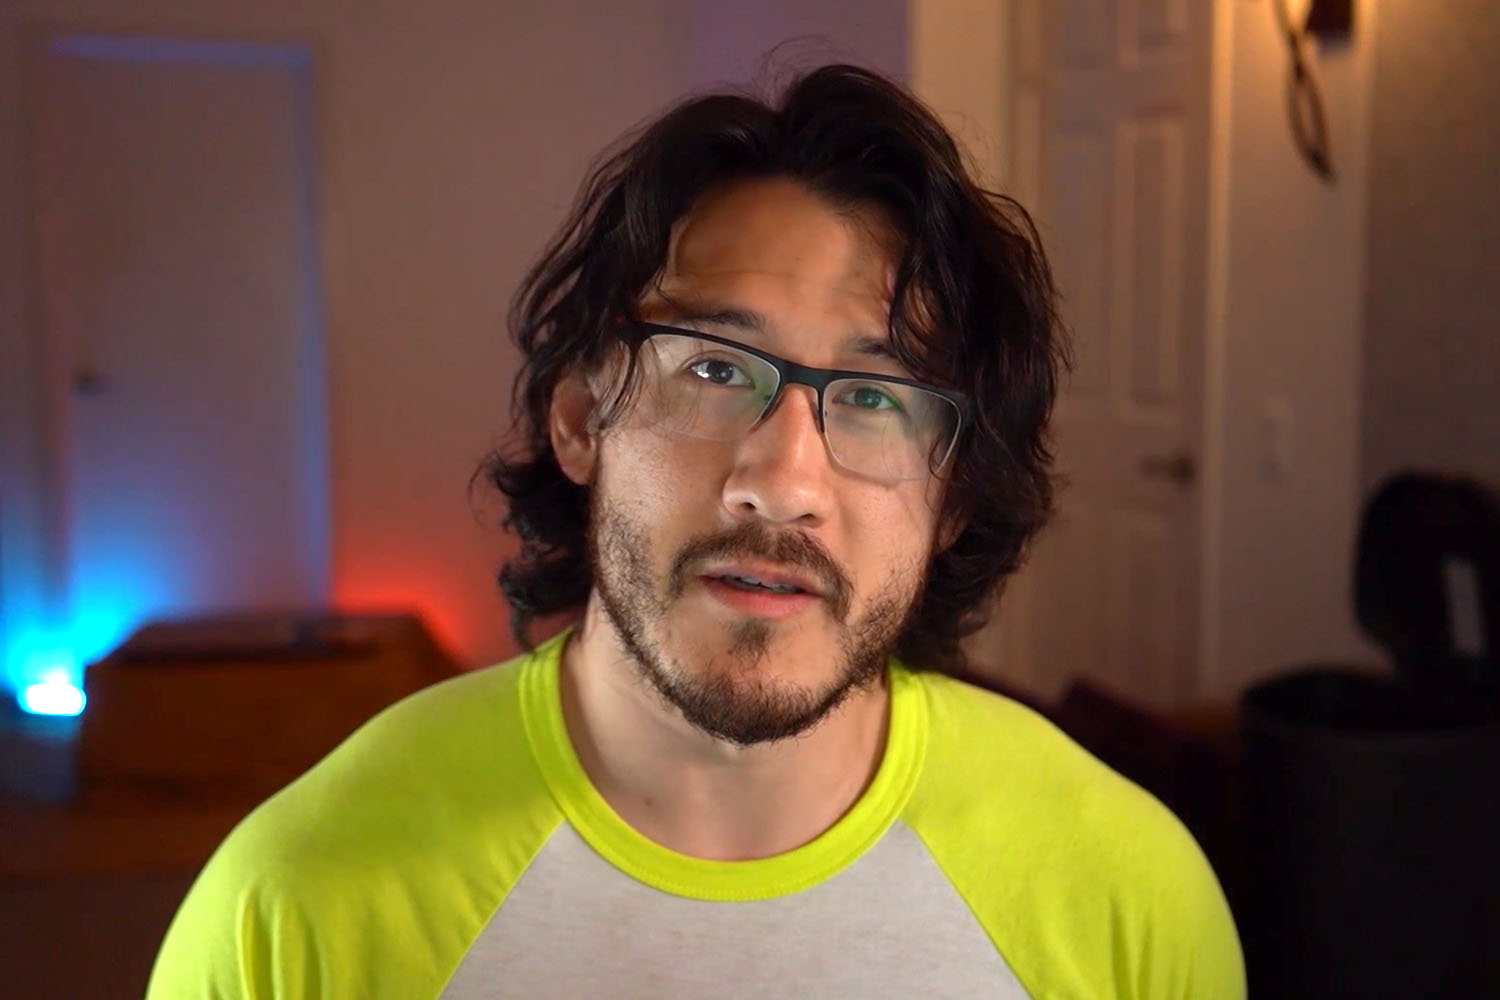 YouTube sensation Markiplier raised $500,000 for the Cancer Research Institute through his sale of a calendar he produced after reaching 20 million YouTube subscribers. CRI honored him with the Oliver R. Grace Award for Distinguished Service in Advancing Cancer Research.